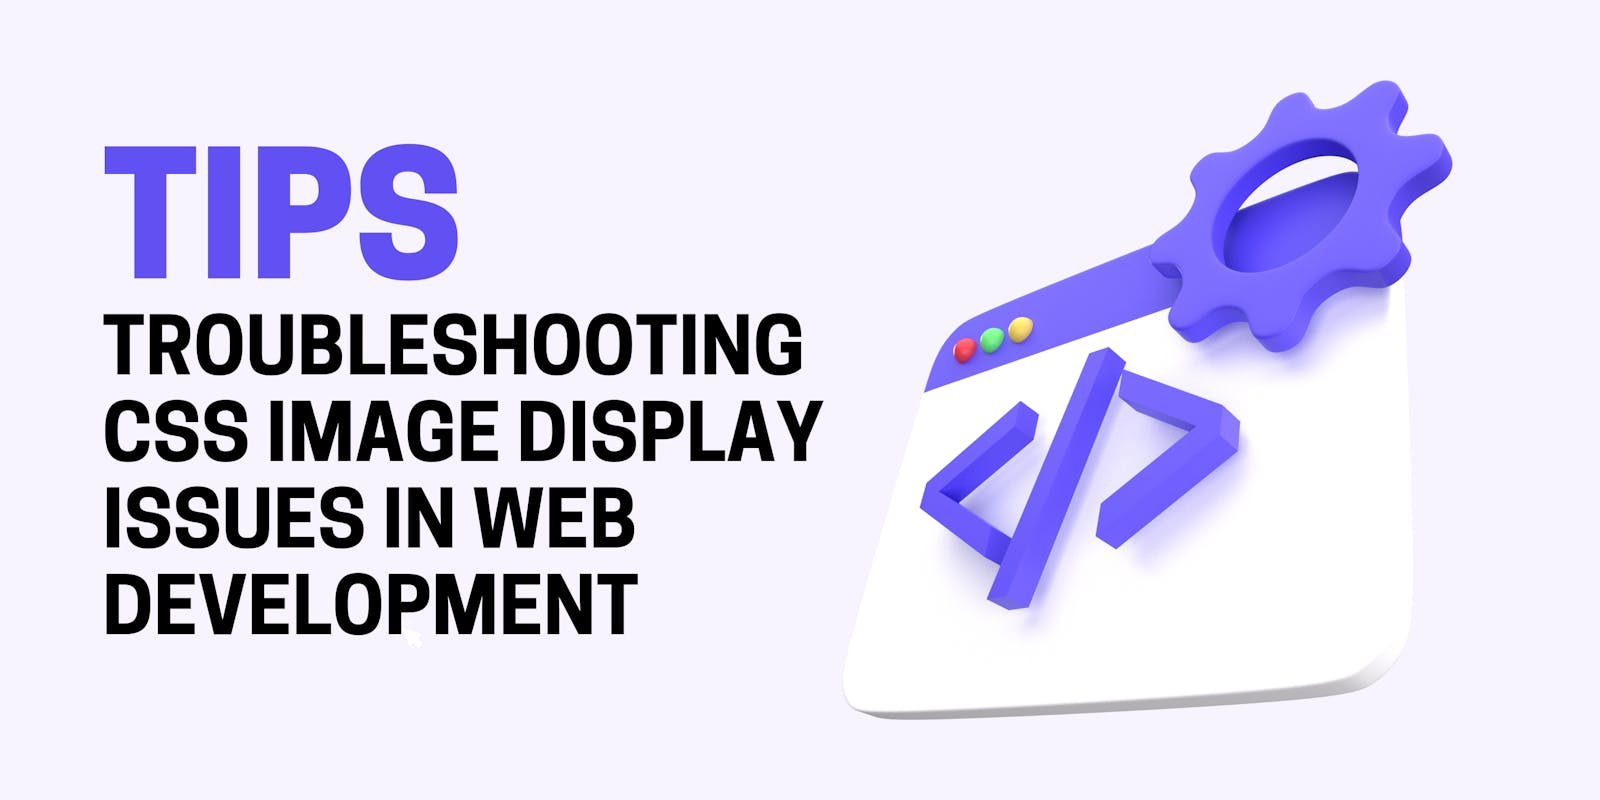 Troubleshooting CSS Image Display Issues in Web Development